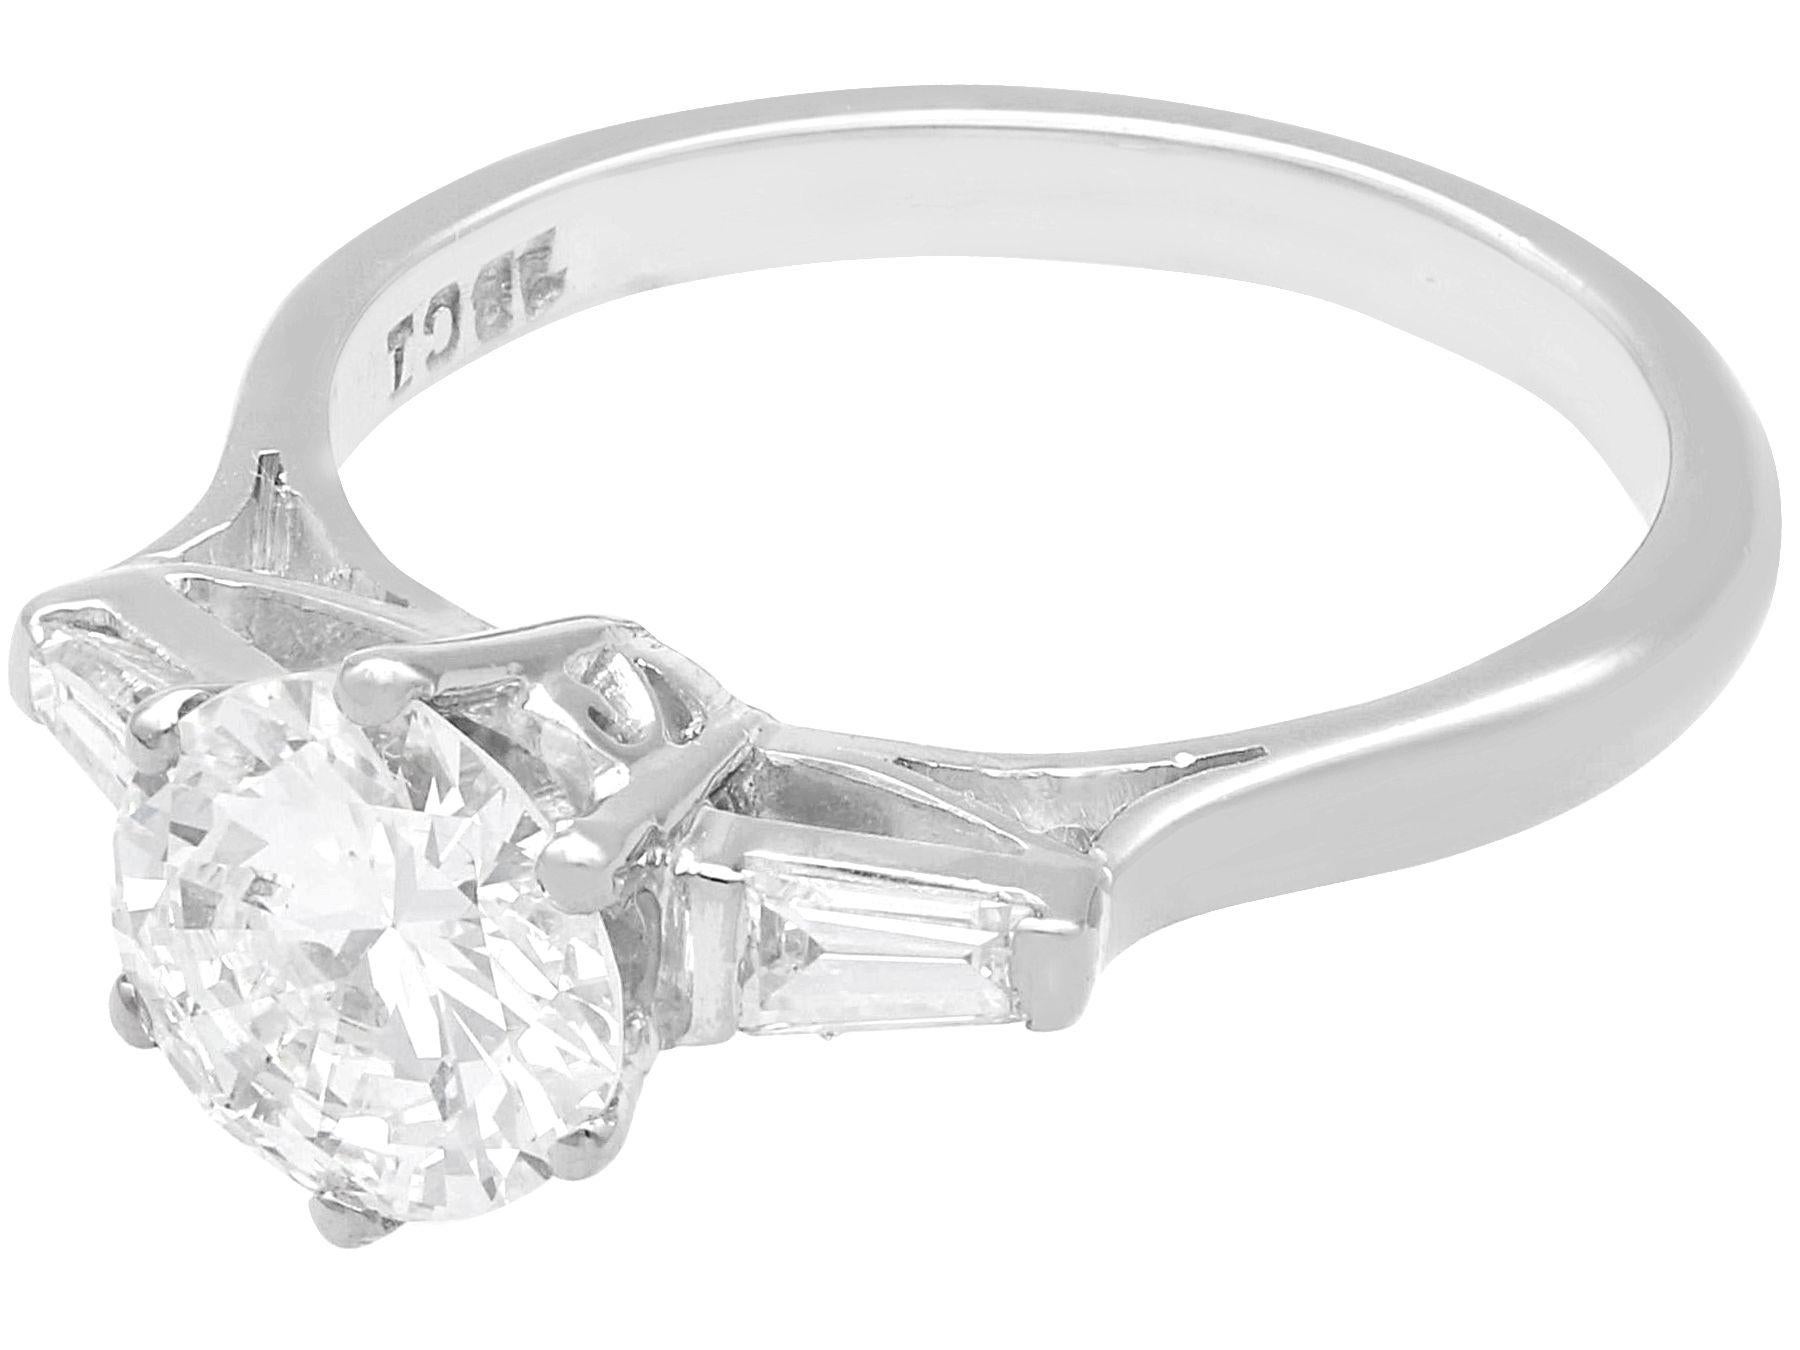 A stunning, fine and impressive 1.62 carat round brilliant cut diamond and 18k white gold solitaire ring; part of our diverse range of diamond jewelry.

This stunning, fine and impressive antique diamond ring has been crafted in 18k white gold.

The